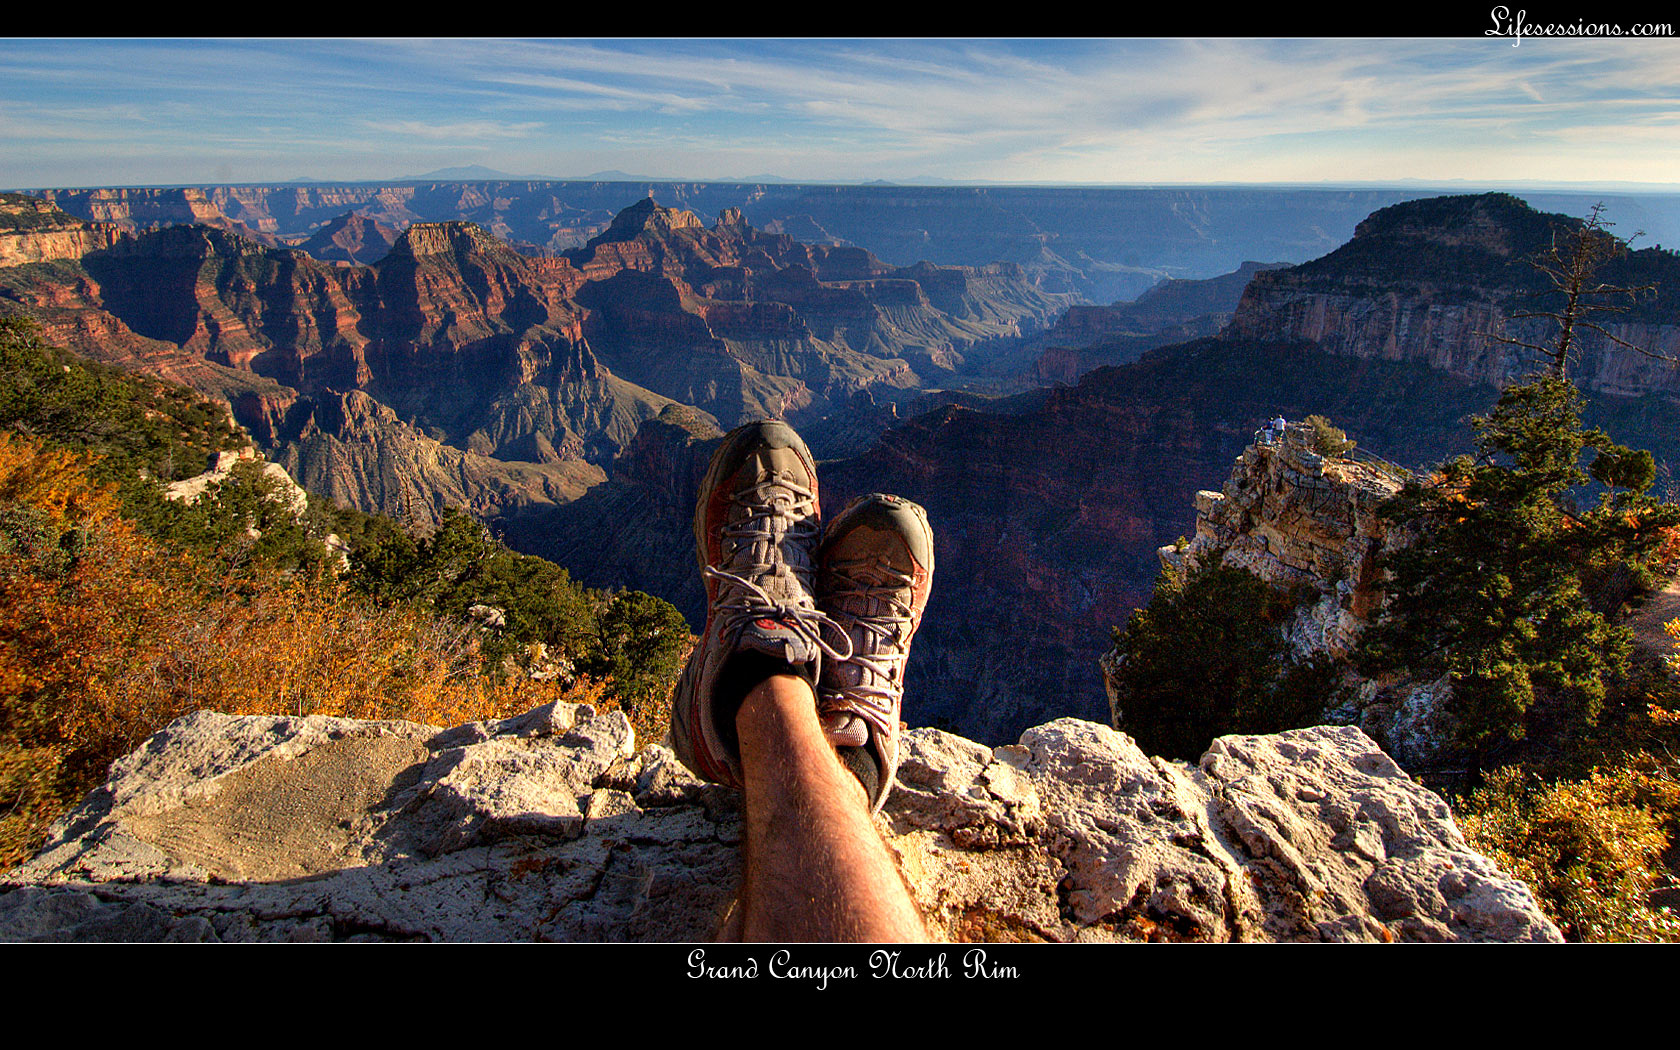 More Grand Canyon Wallpaper United States Of America